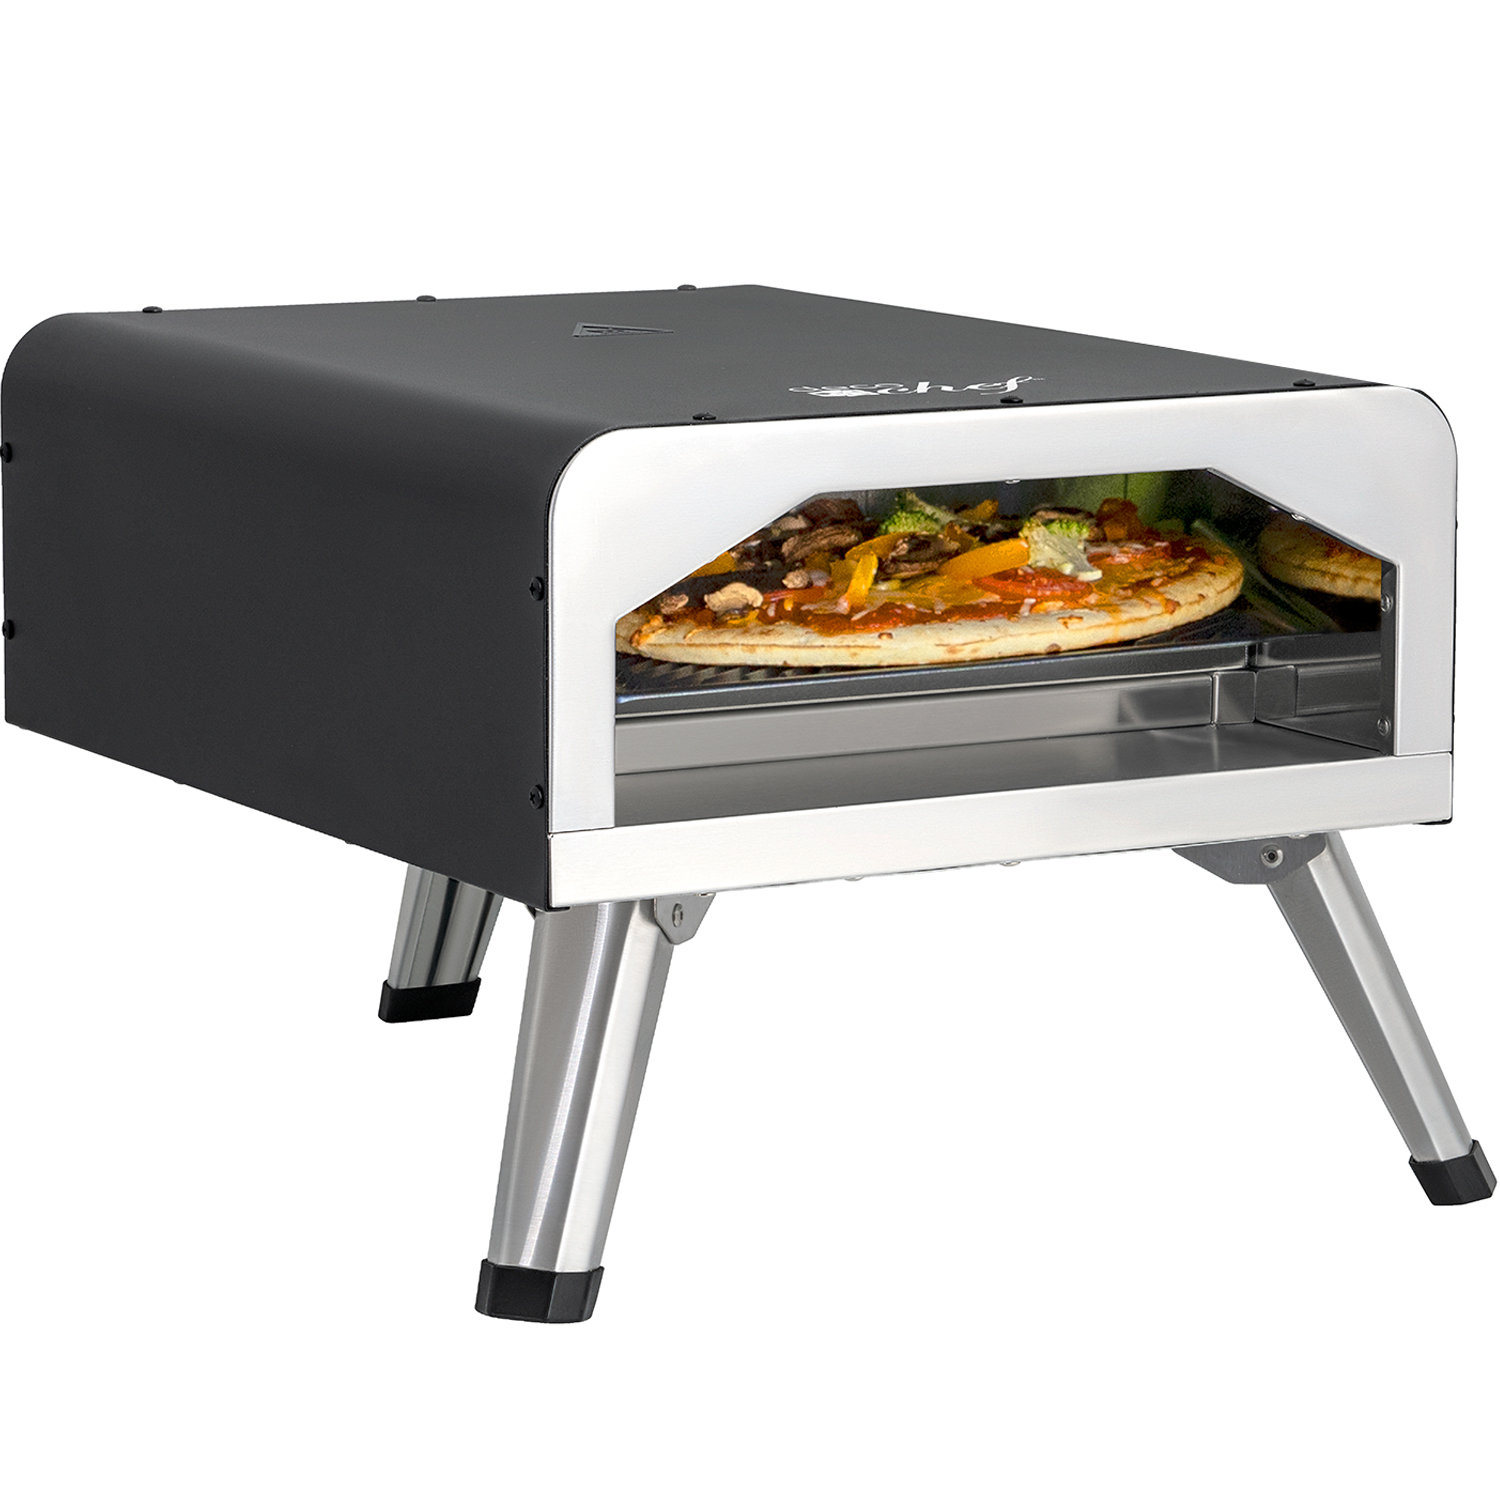 Deco Chef Portable Outdoor Pizza Oven with 2-in-1 Pizza & Grill Oven Functionality, Black